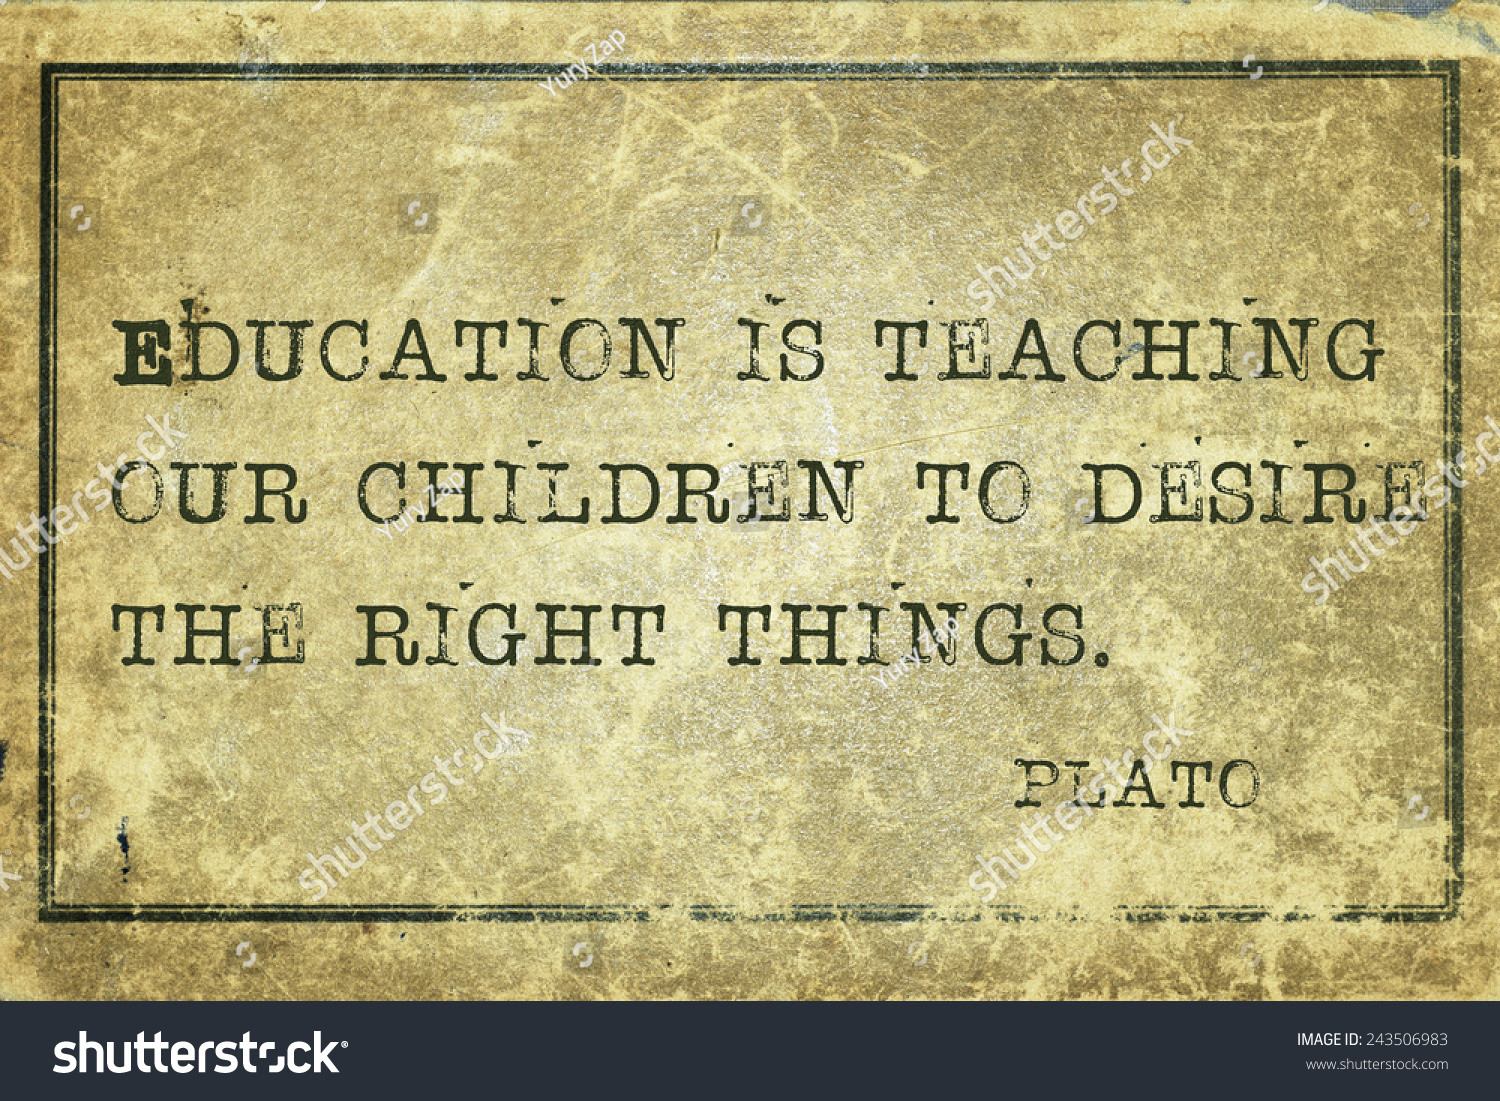 Plato Quotes On Education
 Education Teaching Our Children Ancient Greek Stock